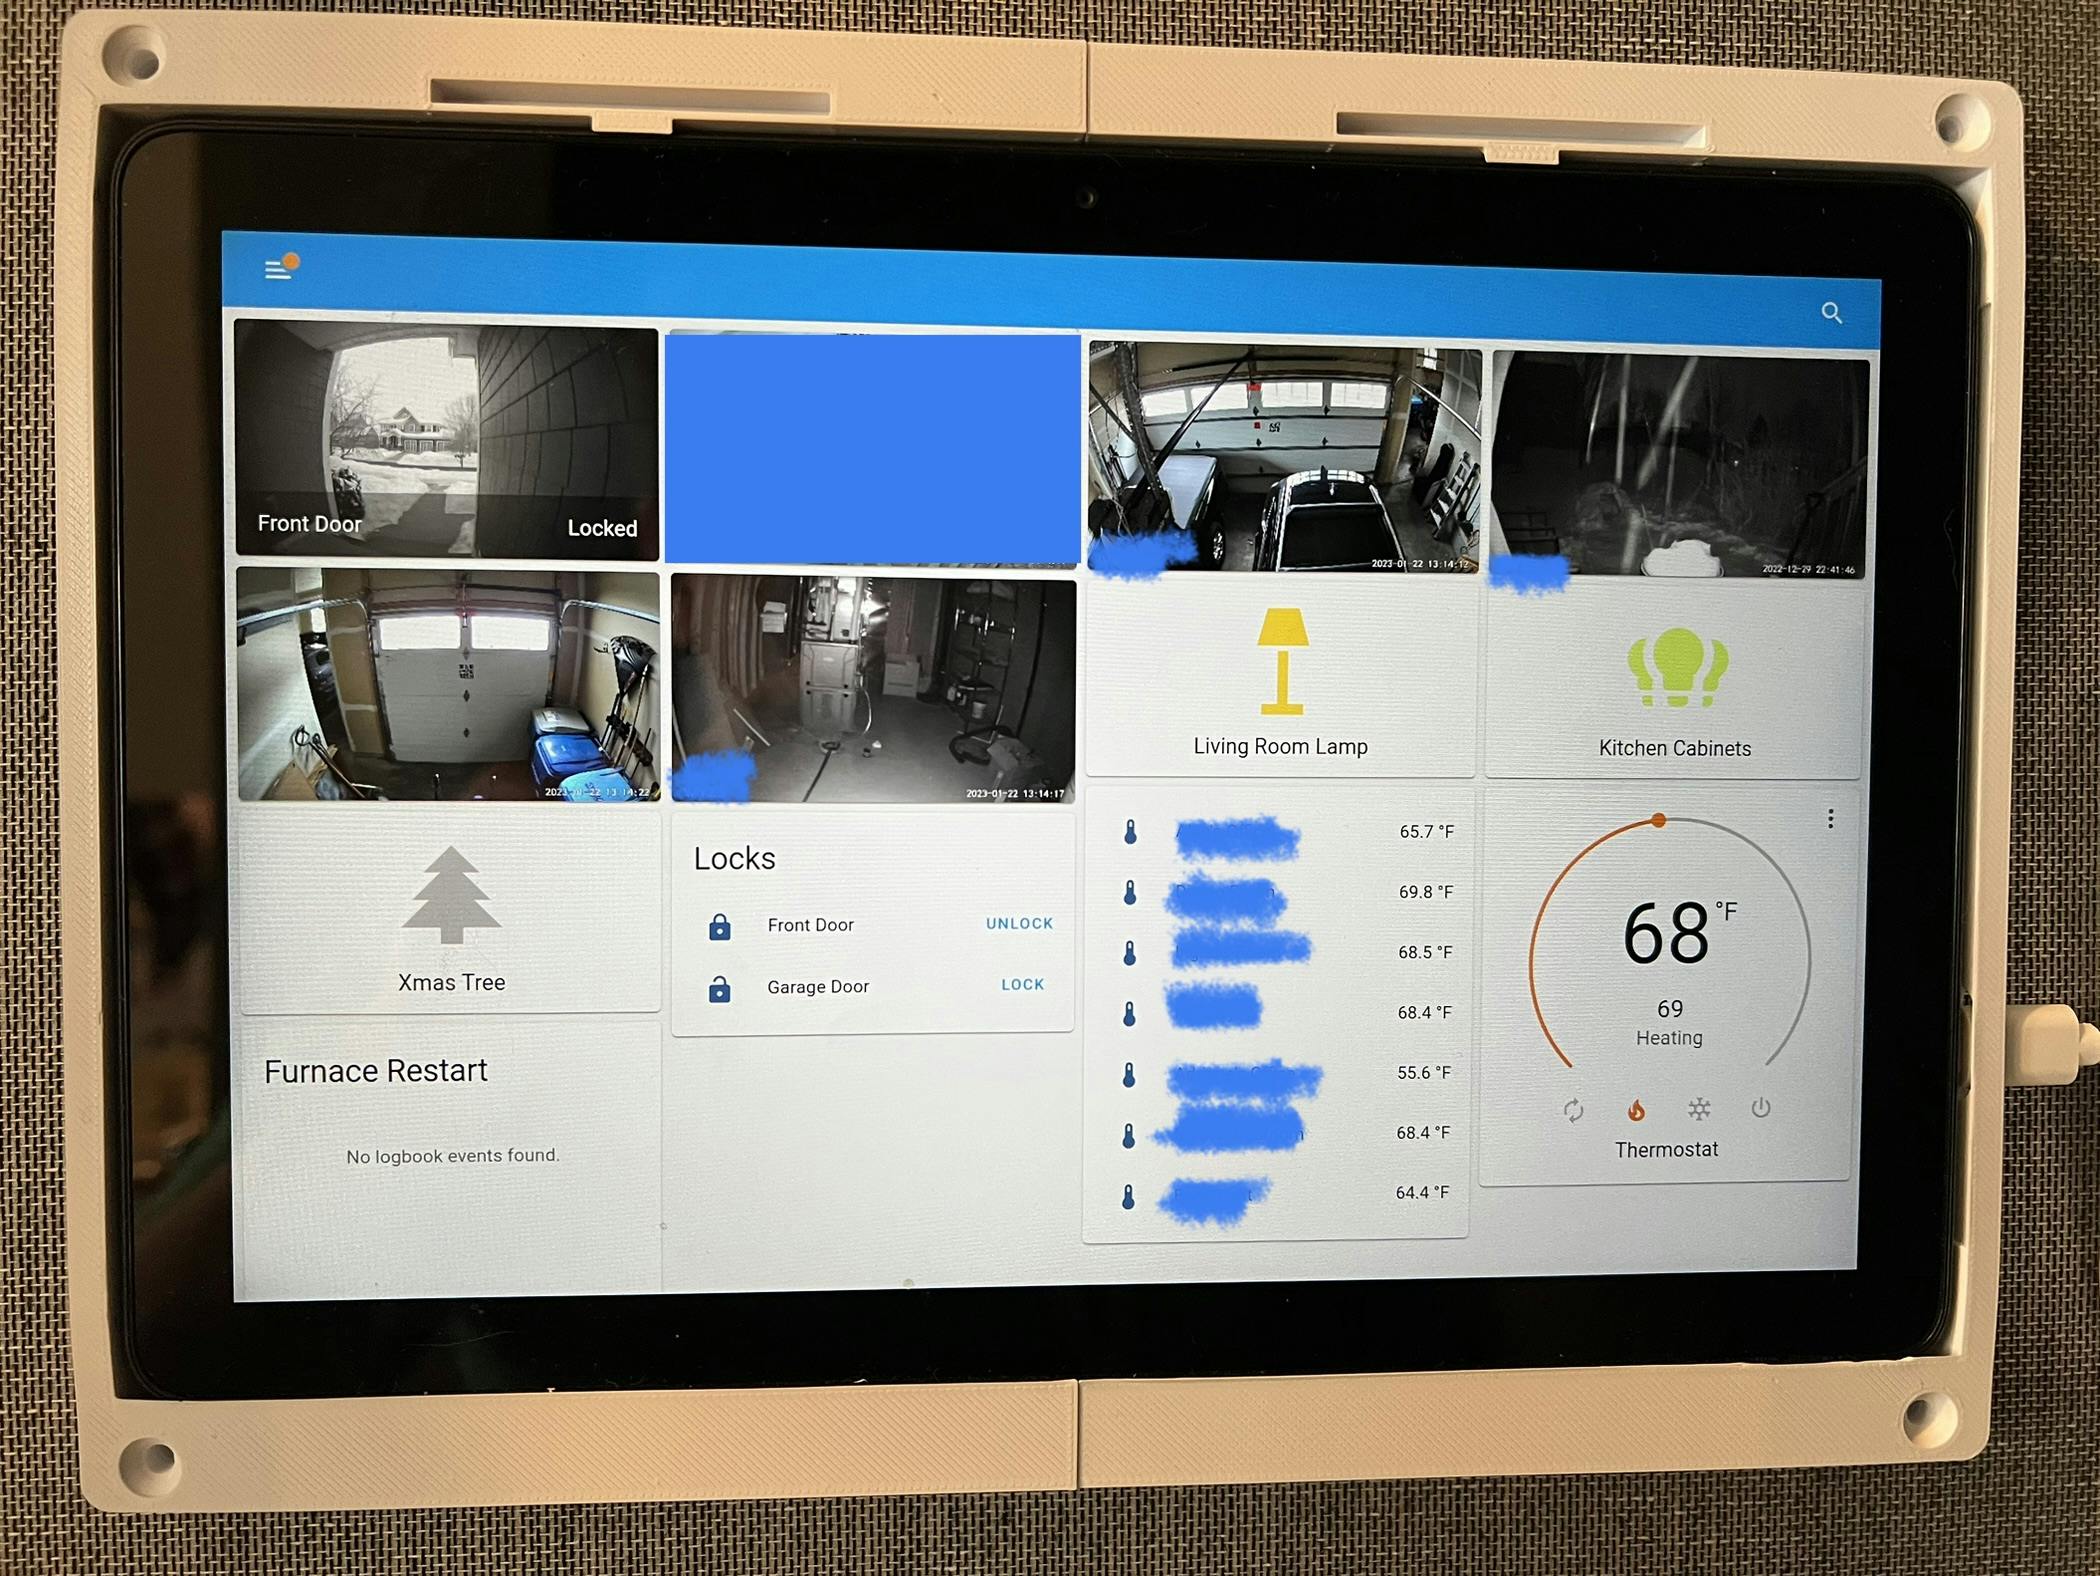 Home Assistant kiosk mounted on wall